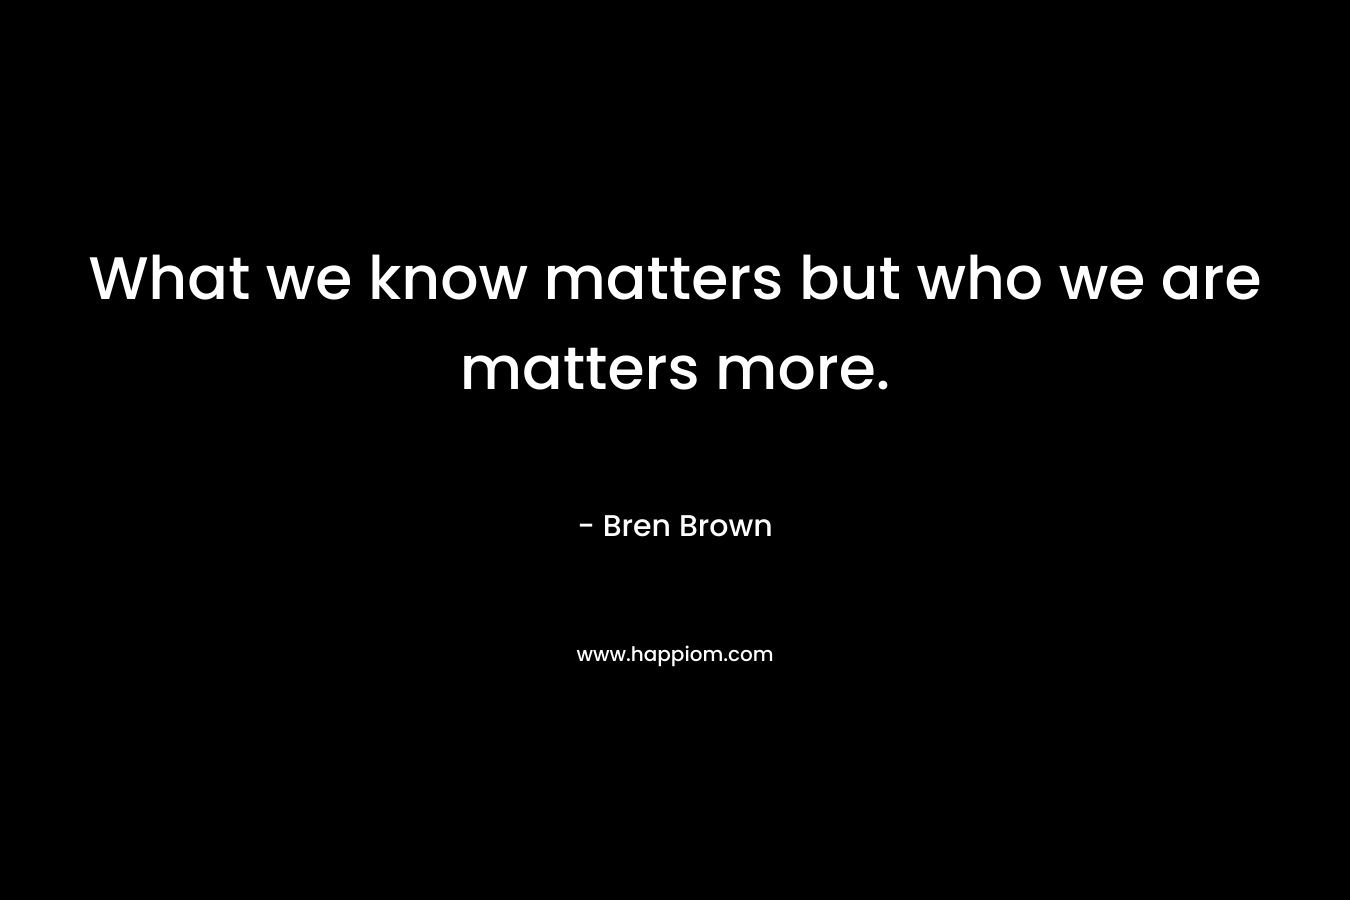 What we know matters but who we are matters more.